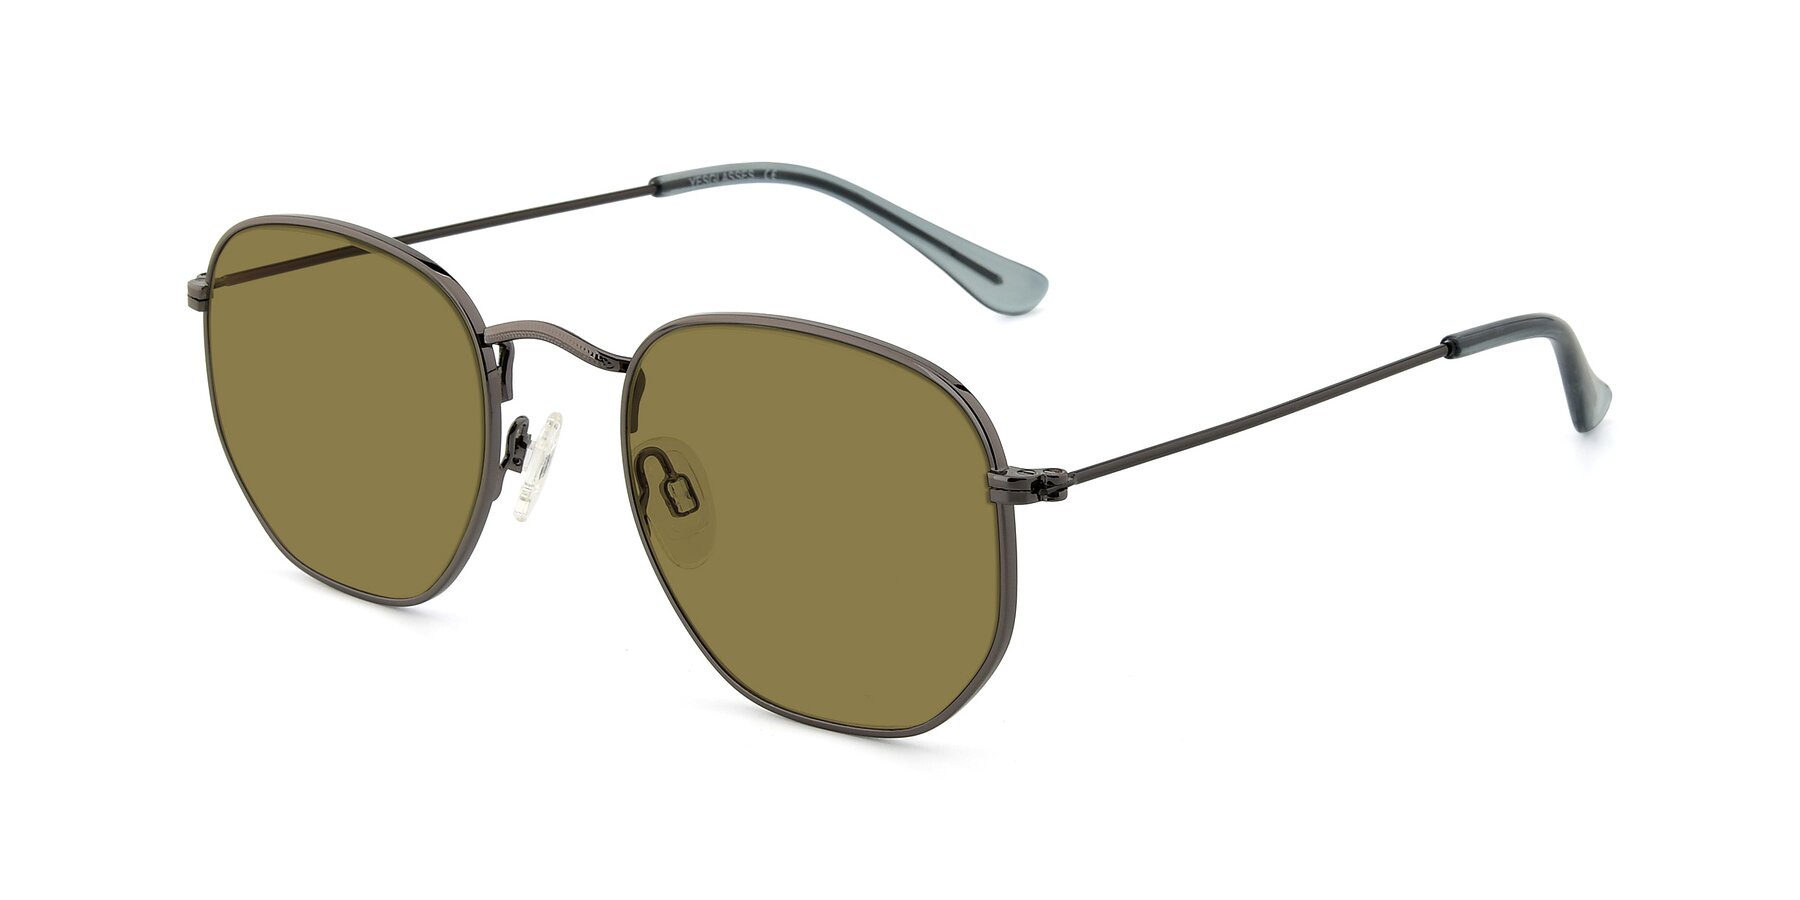 Angle of SSR1943 in Grey with Brown Polarized Lenses